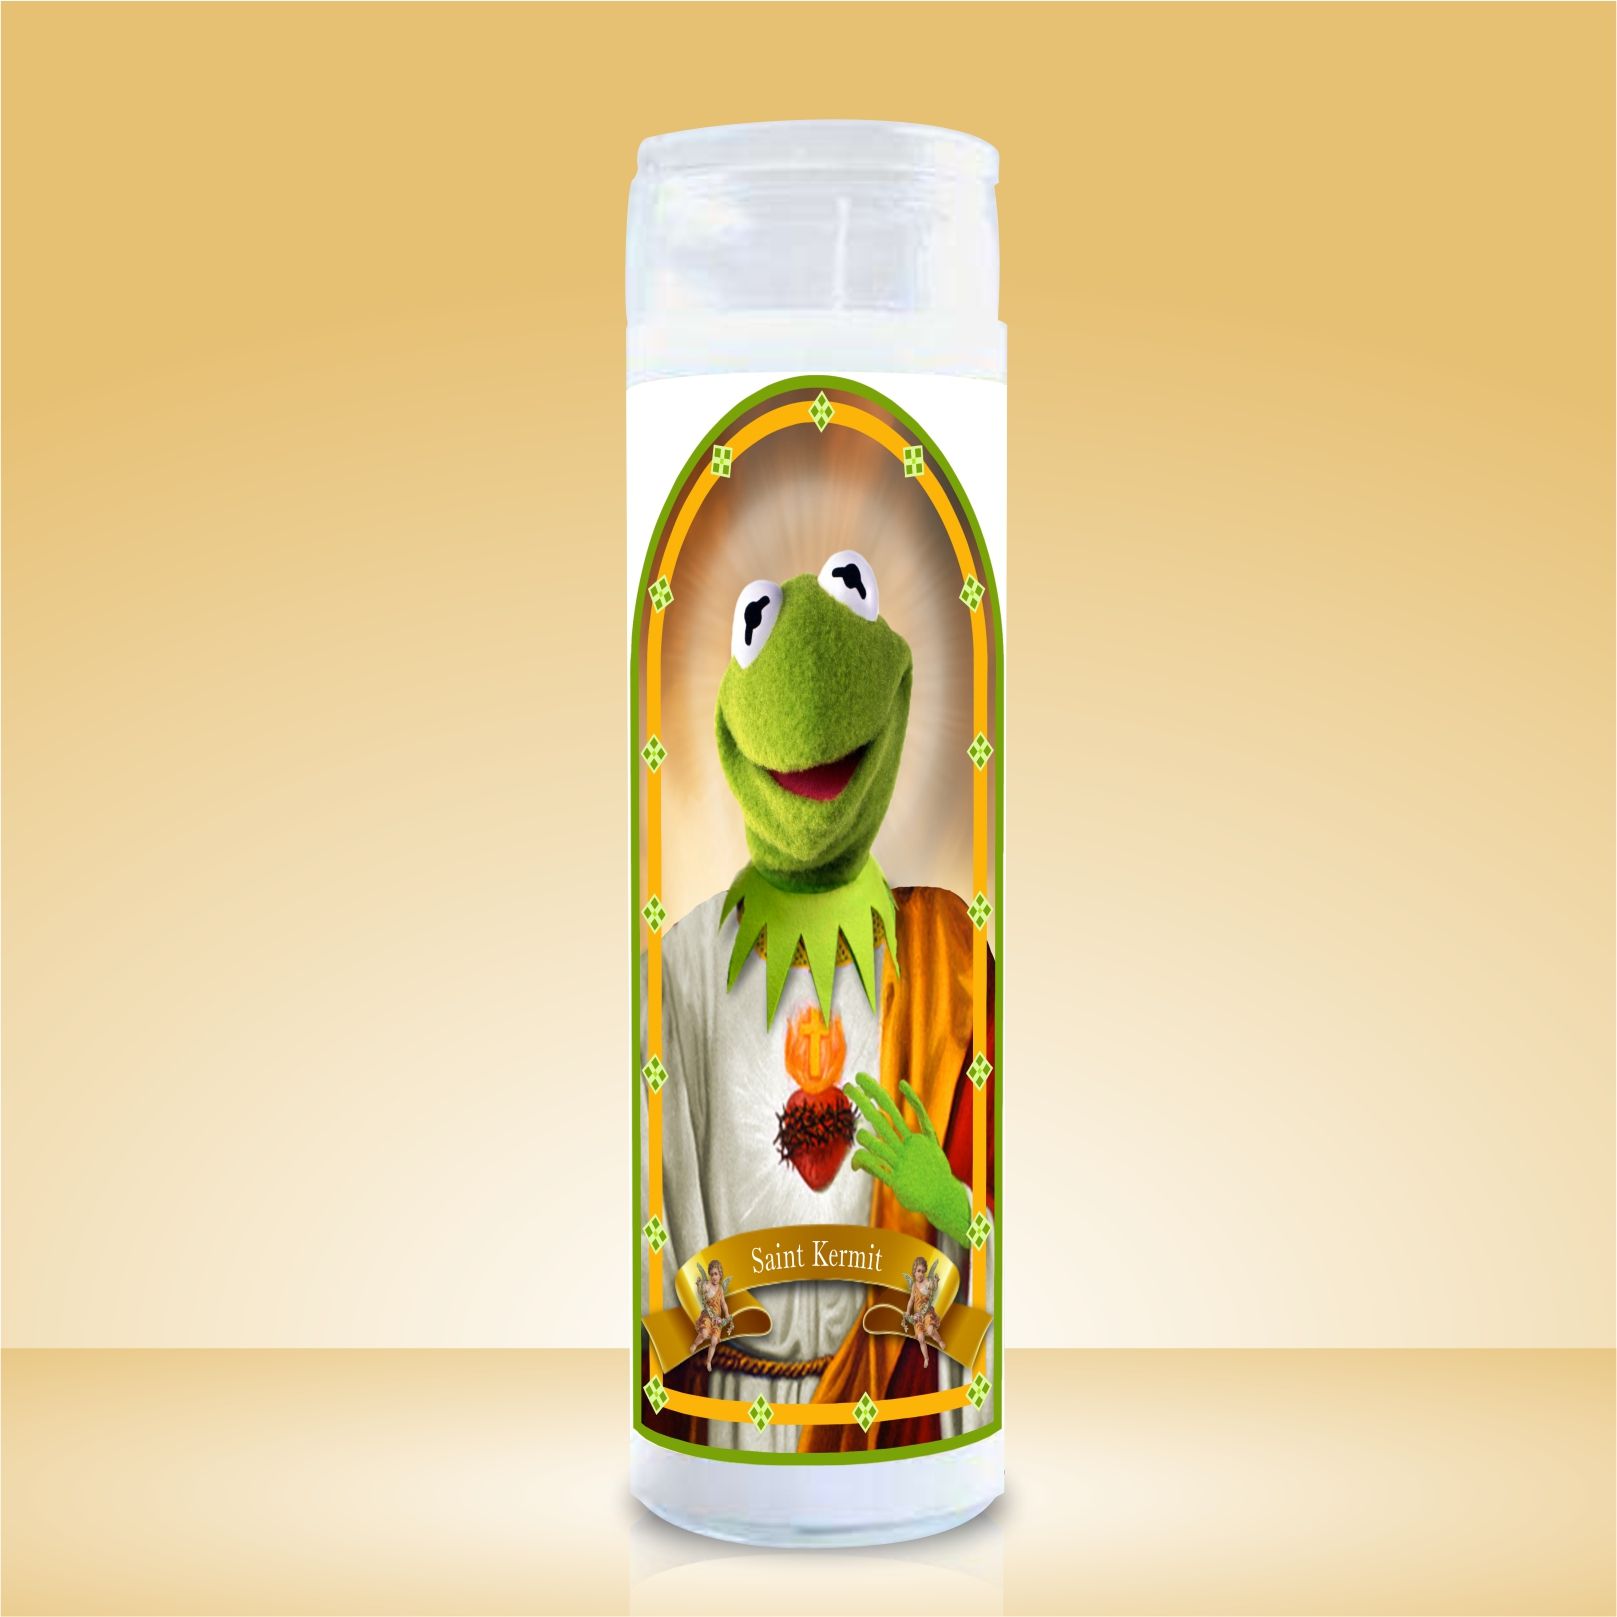 Kermit the Frog Celebrity Prayer Candle